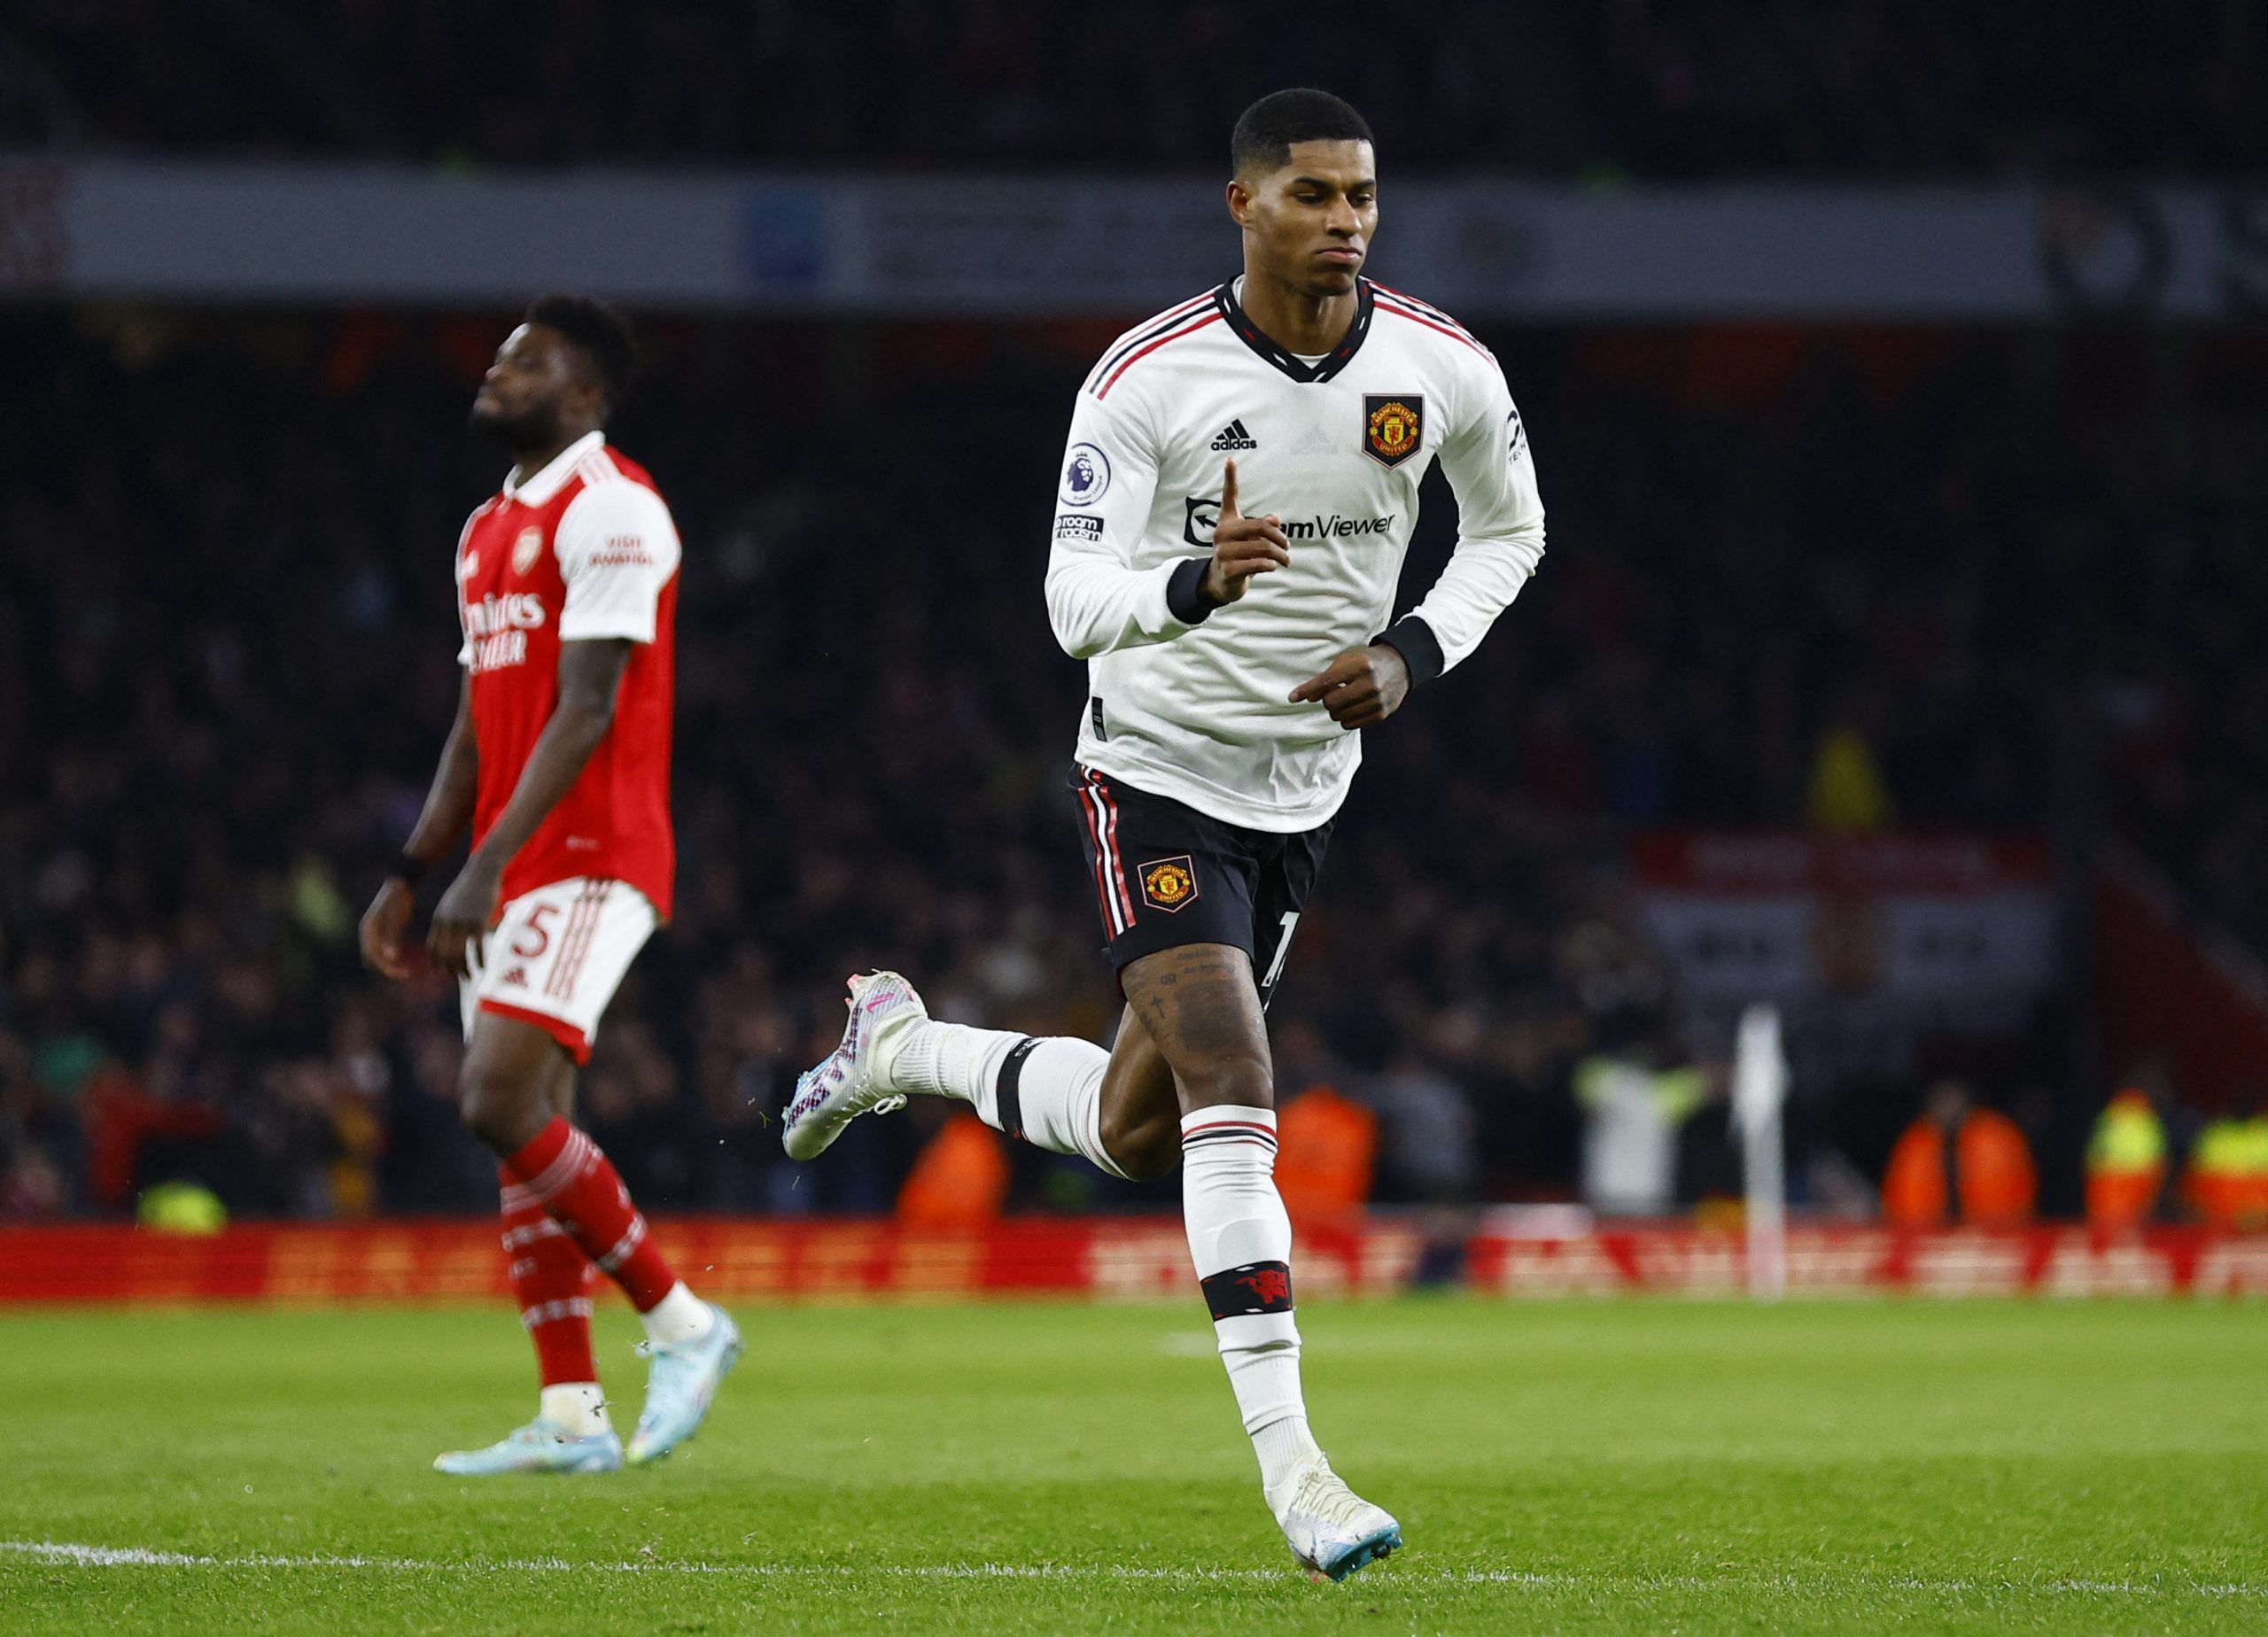 Soccer Football - Premier League - Arsenal v Manchester United - Emirates Stadium, London, Britain - January 22, 2023 Manchester United's Marcus Rashford scores their first goal Action Images via Reuters/Peter Cziborra EDITORIAL USE ONLY. No use with unauthorized audio, video, data, fixture lists, club/league logos or 'live' services. Online in-match use limited to 75 images, no video emulation. No use in betting, games or single club /league/player publications.  Please contact your account rep